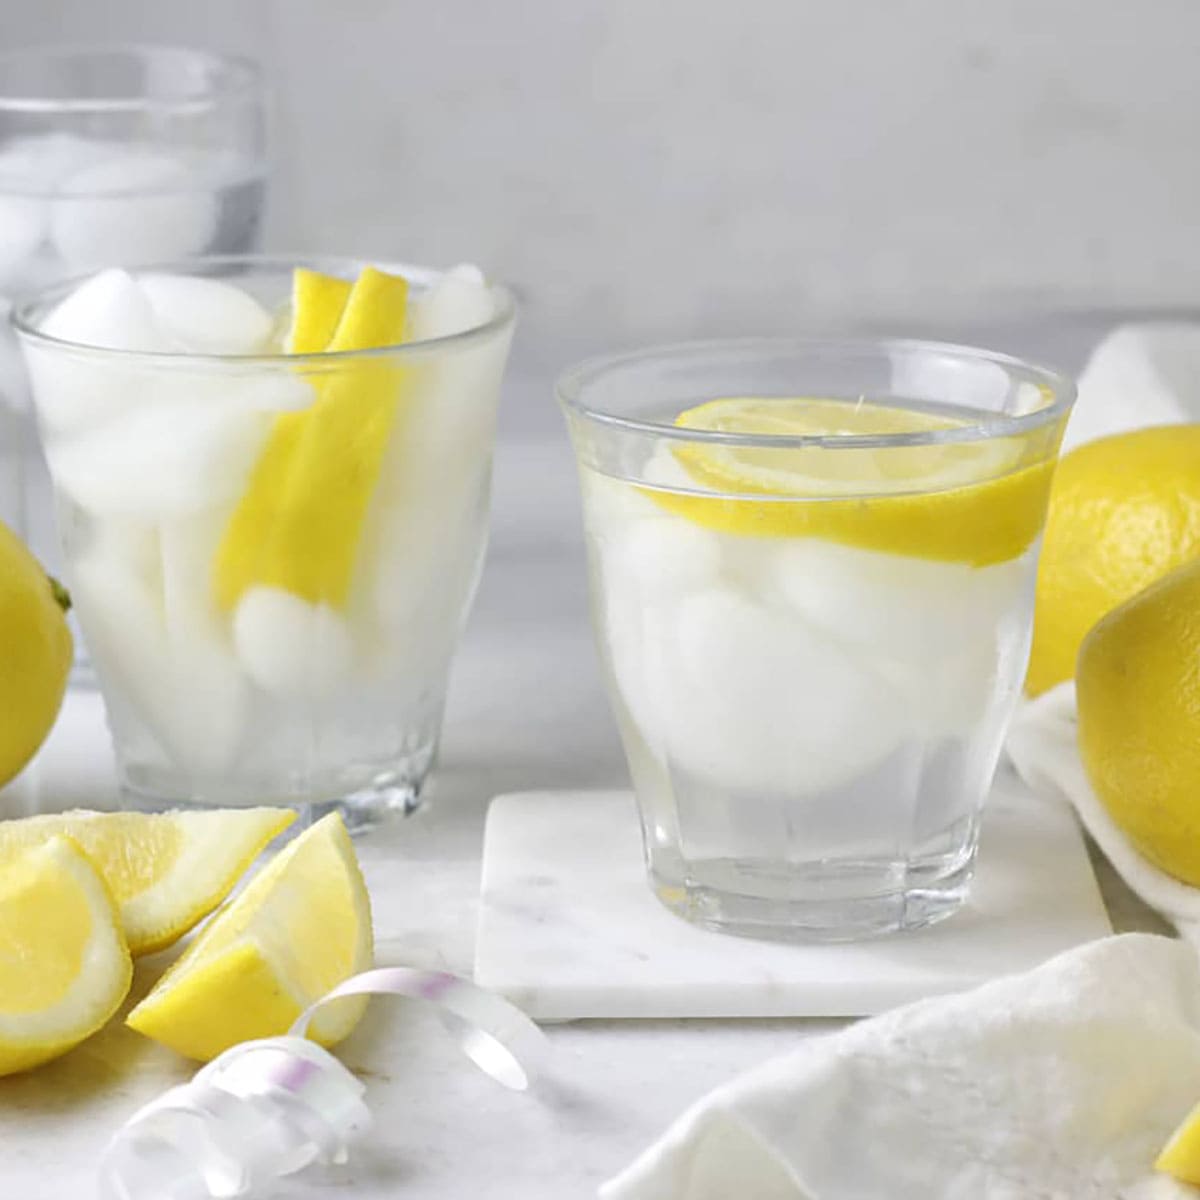 cold lemon water in glasses on a table.